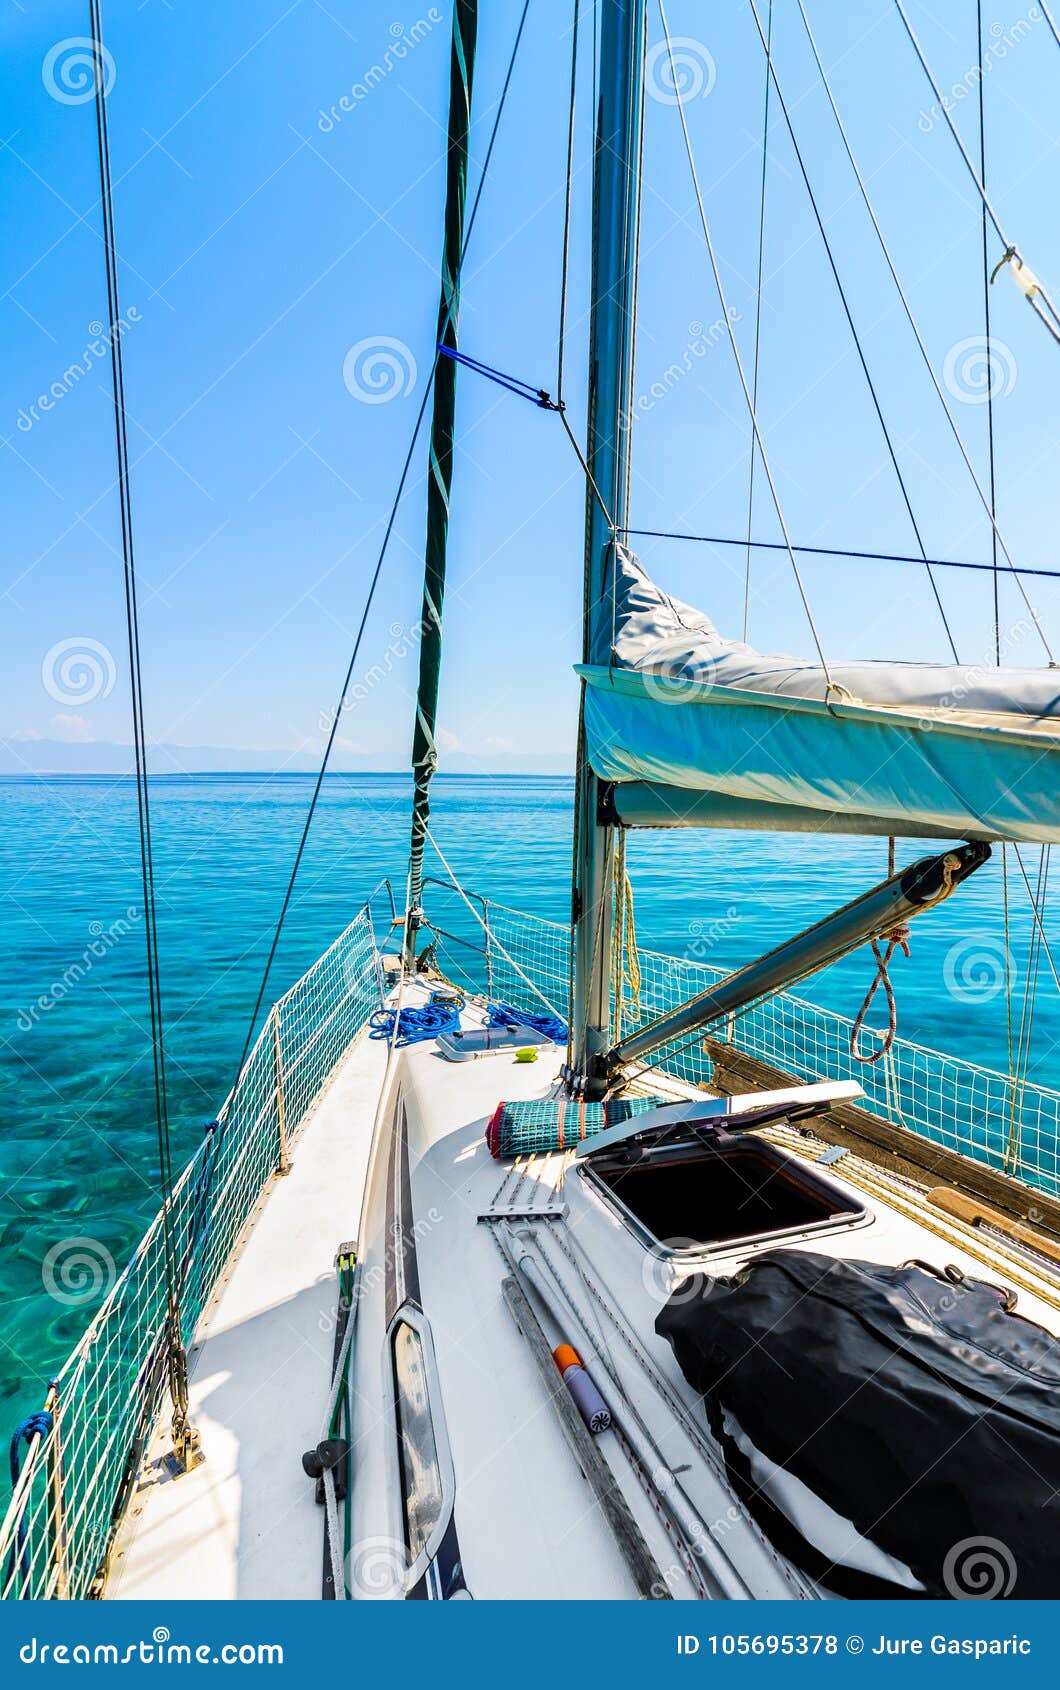 front view of sailing boat on the sea. stock photo - image